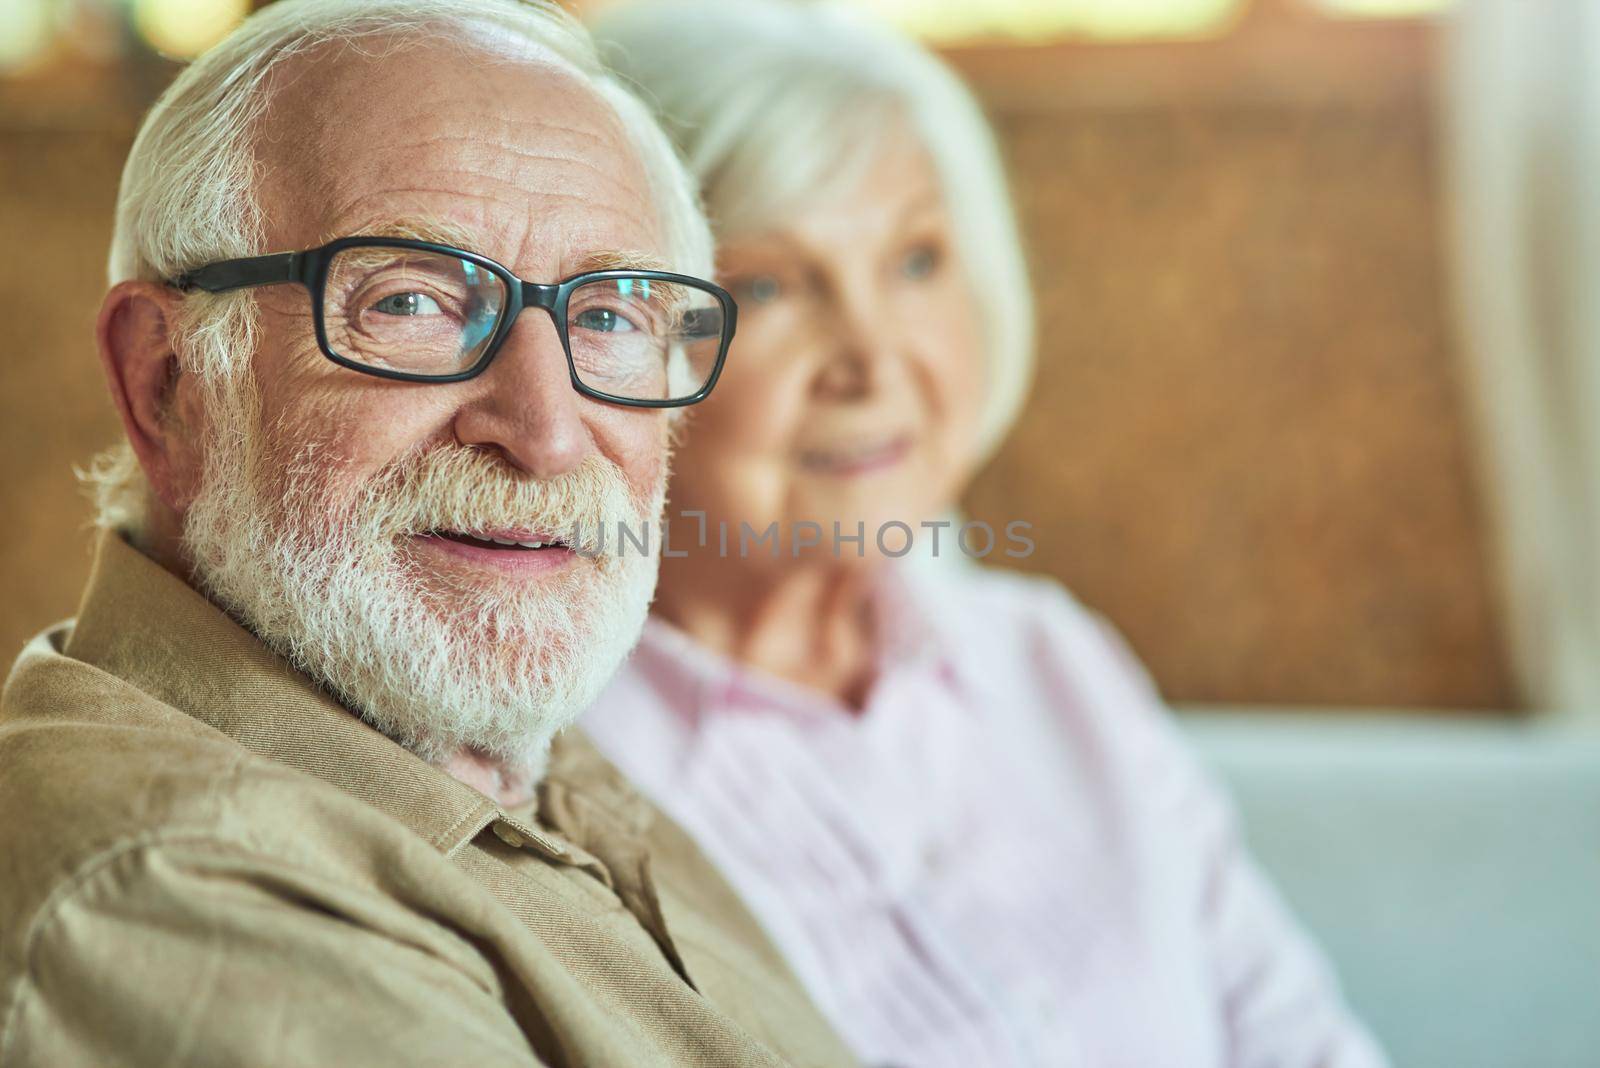 Smiling senior man wearing glasses looking at camera with her wife sitting on the background at home. Family and relationships concept